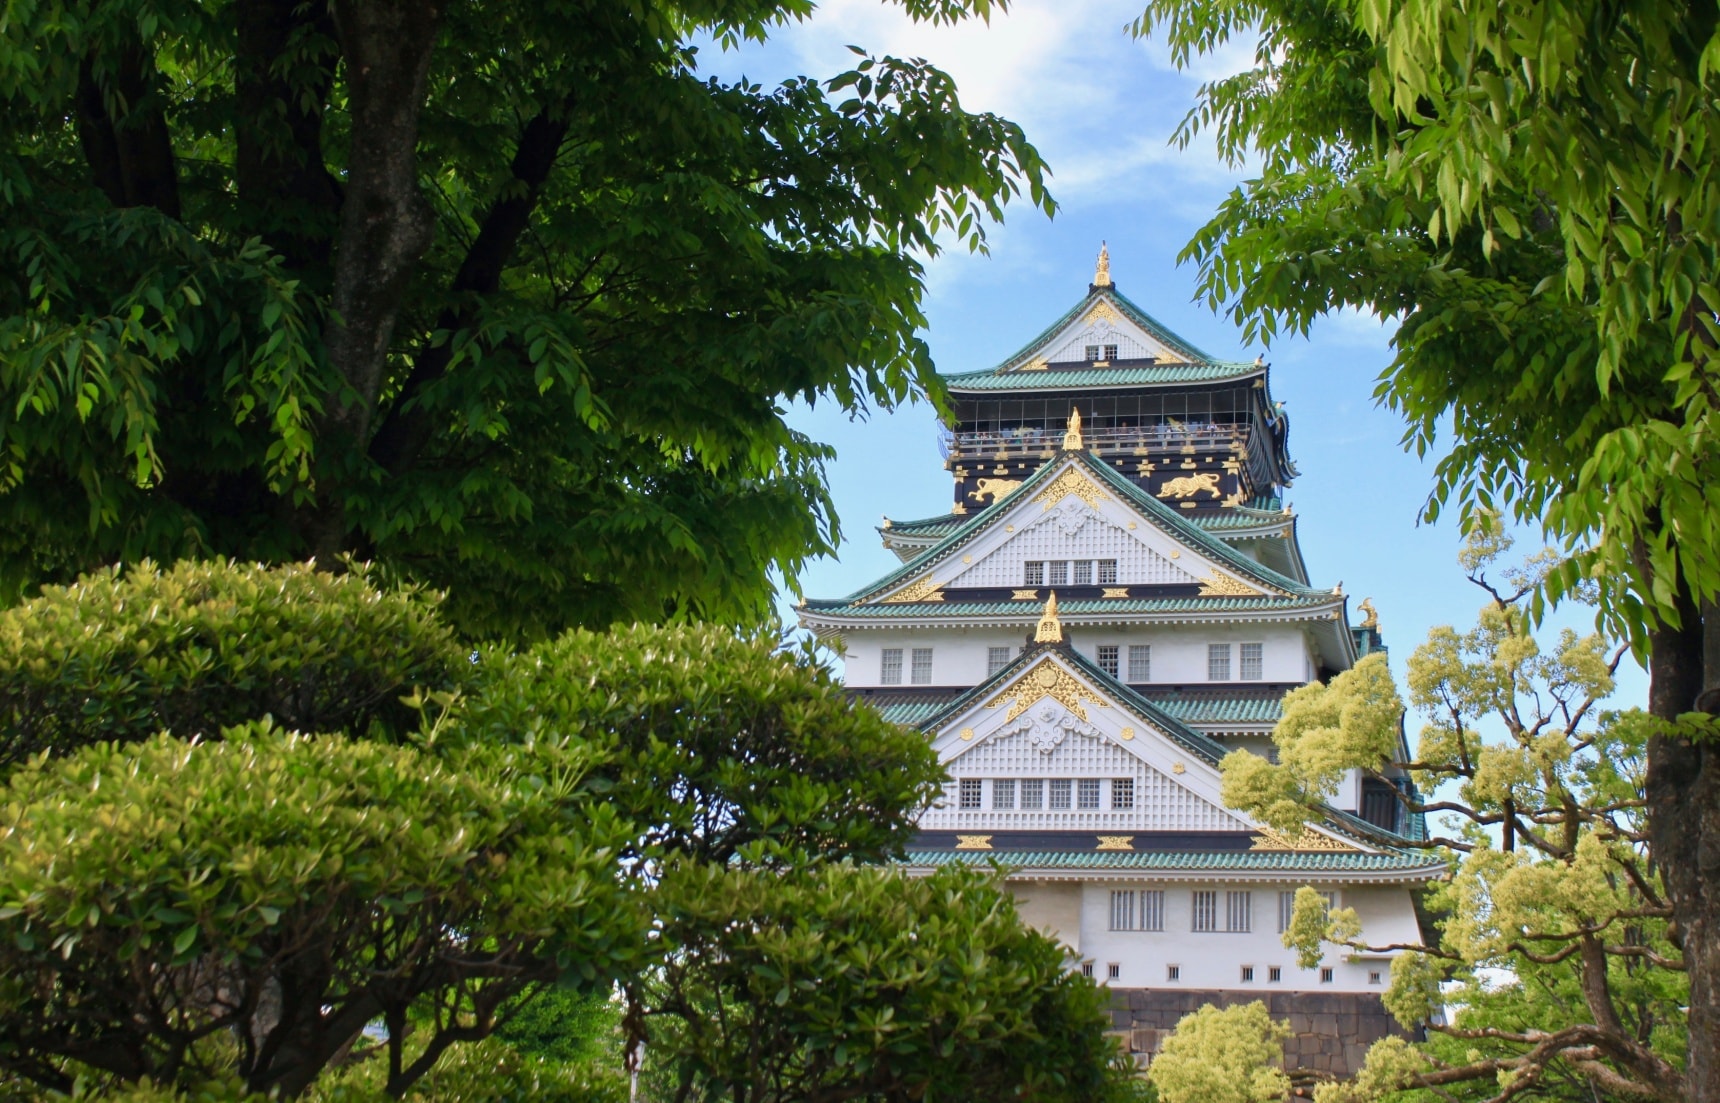 4 Things to Do on a Weekend in Osaka